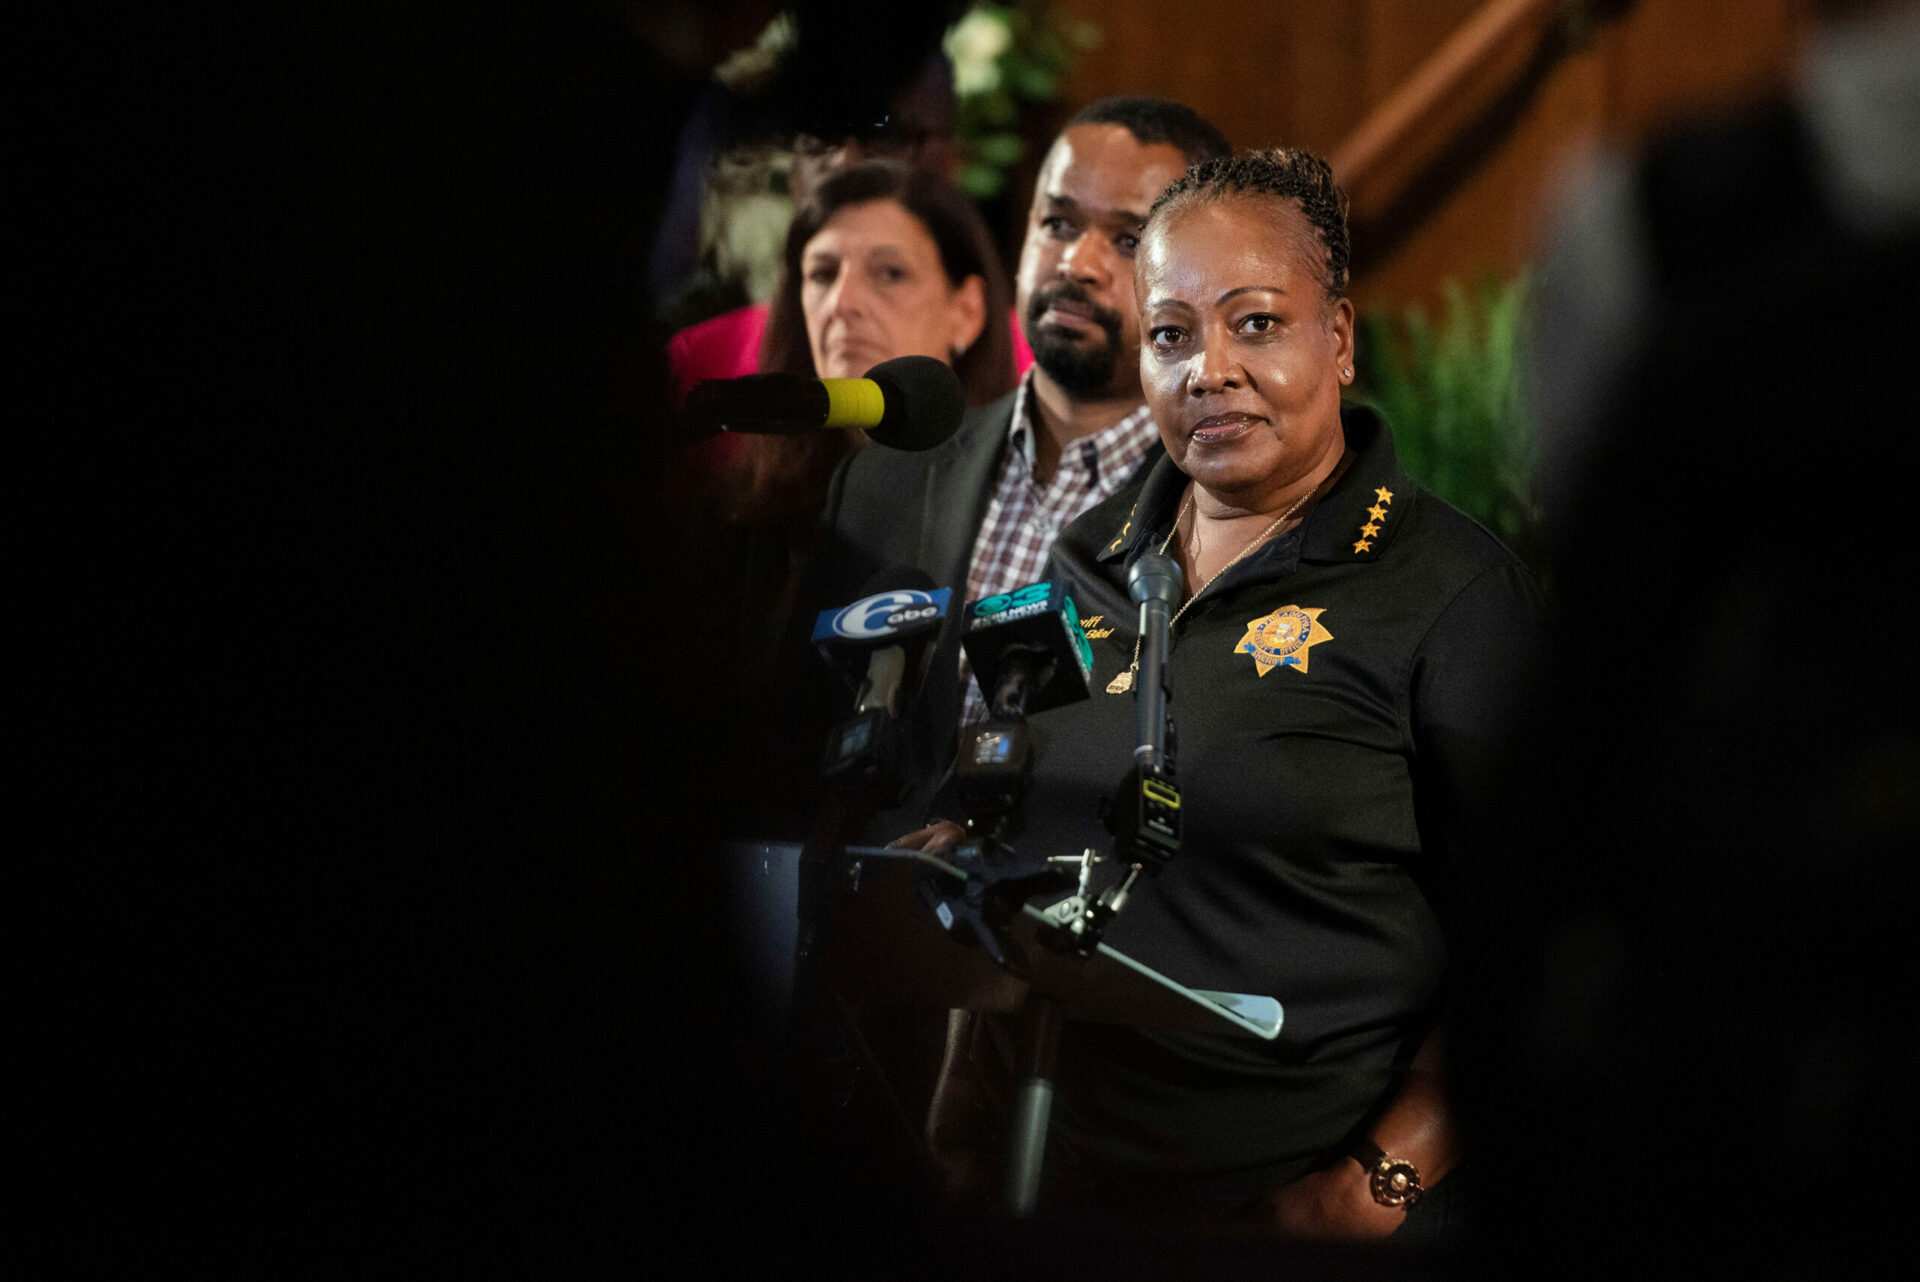 Philadelphia Sheriff’s Office can’t account for nearly 200 guns, city controller says